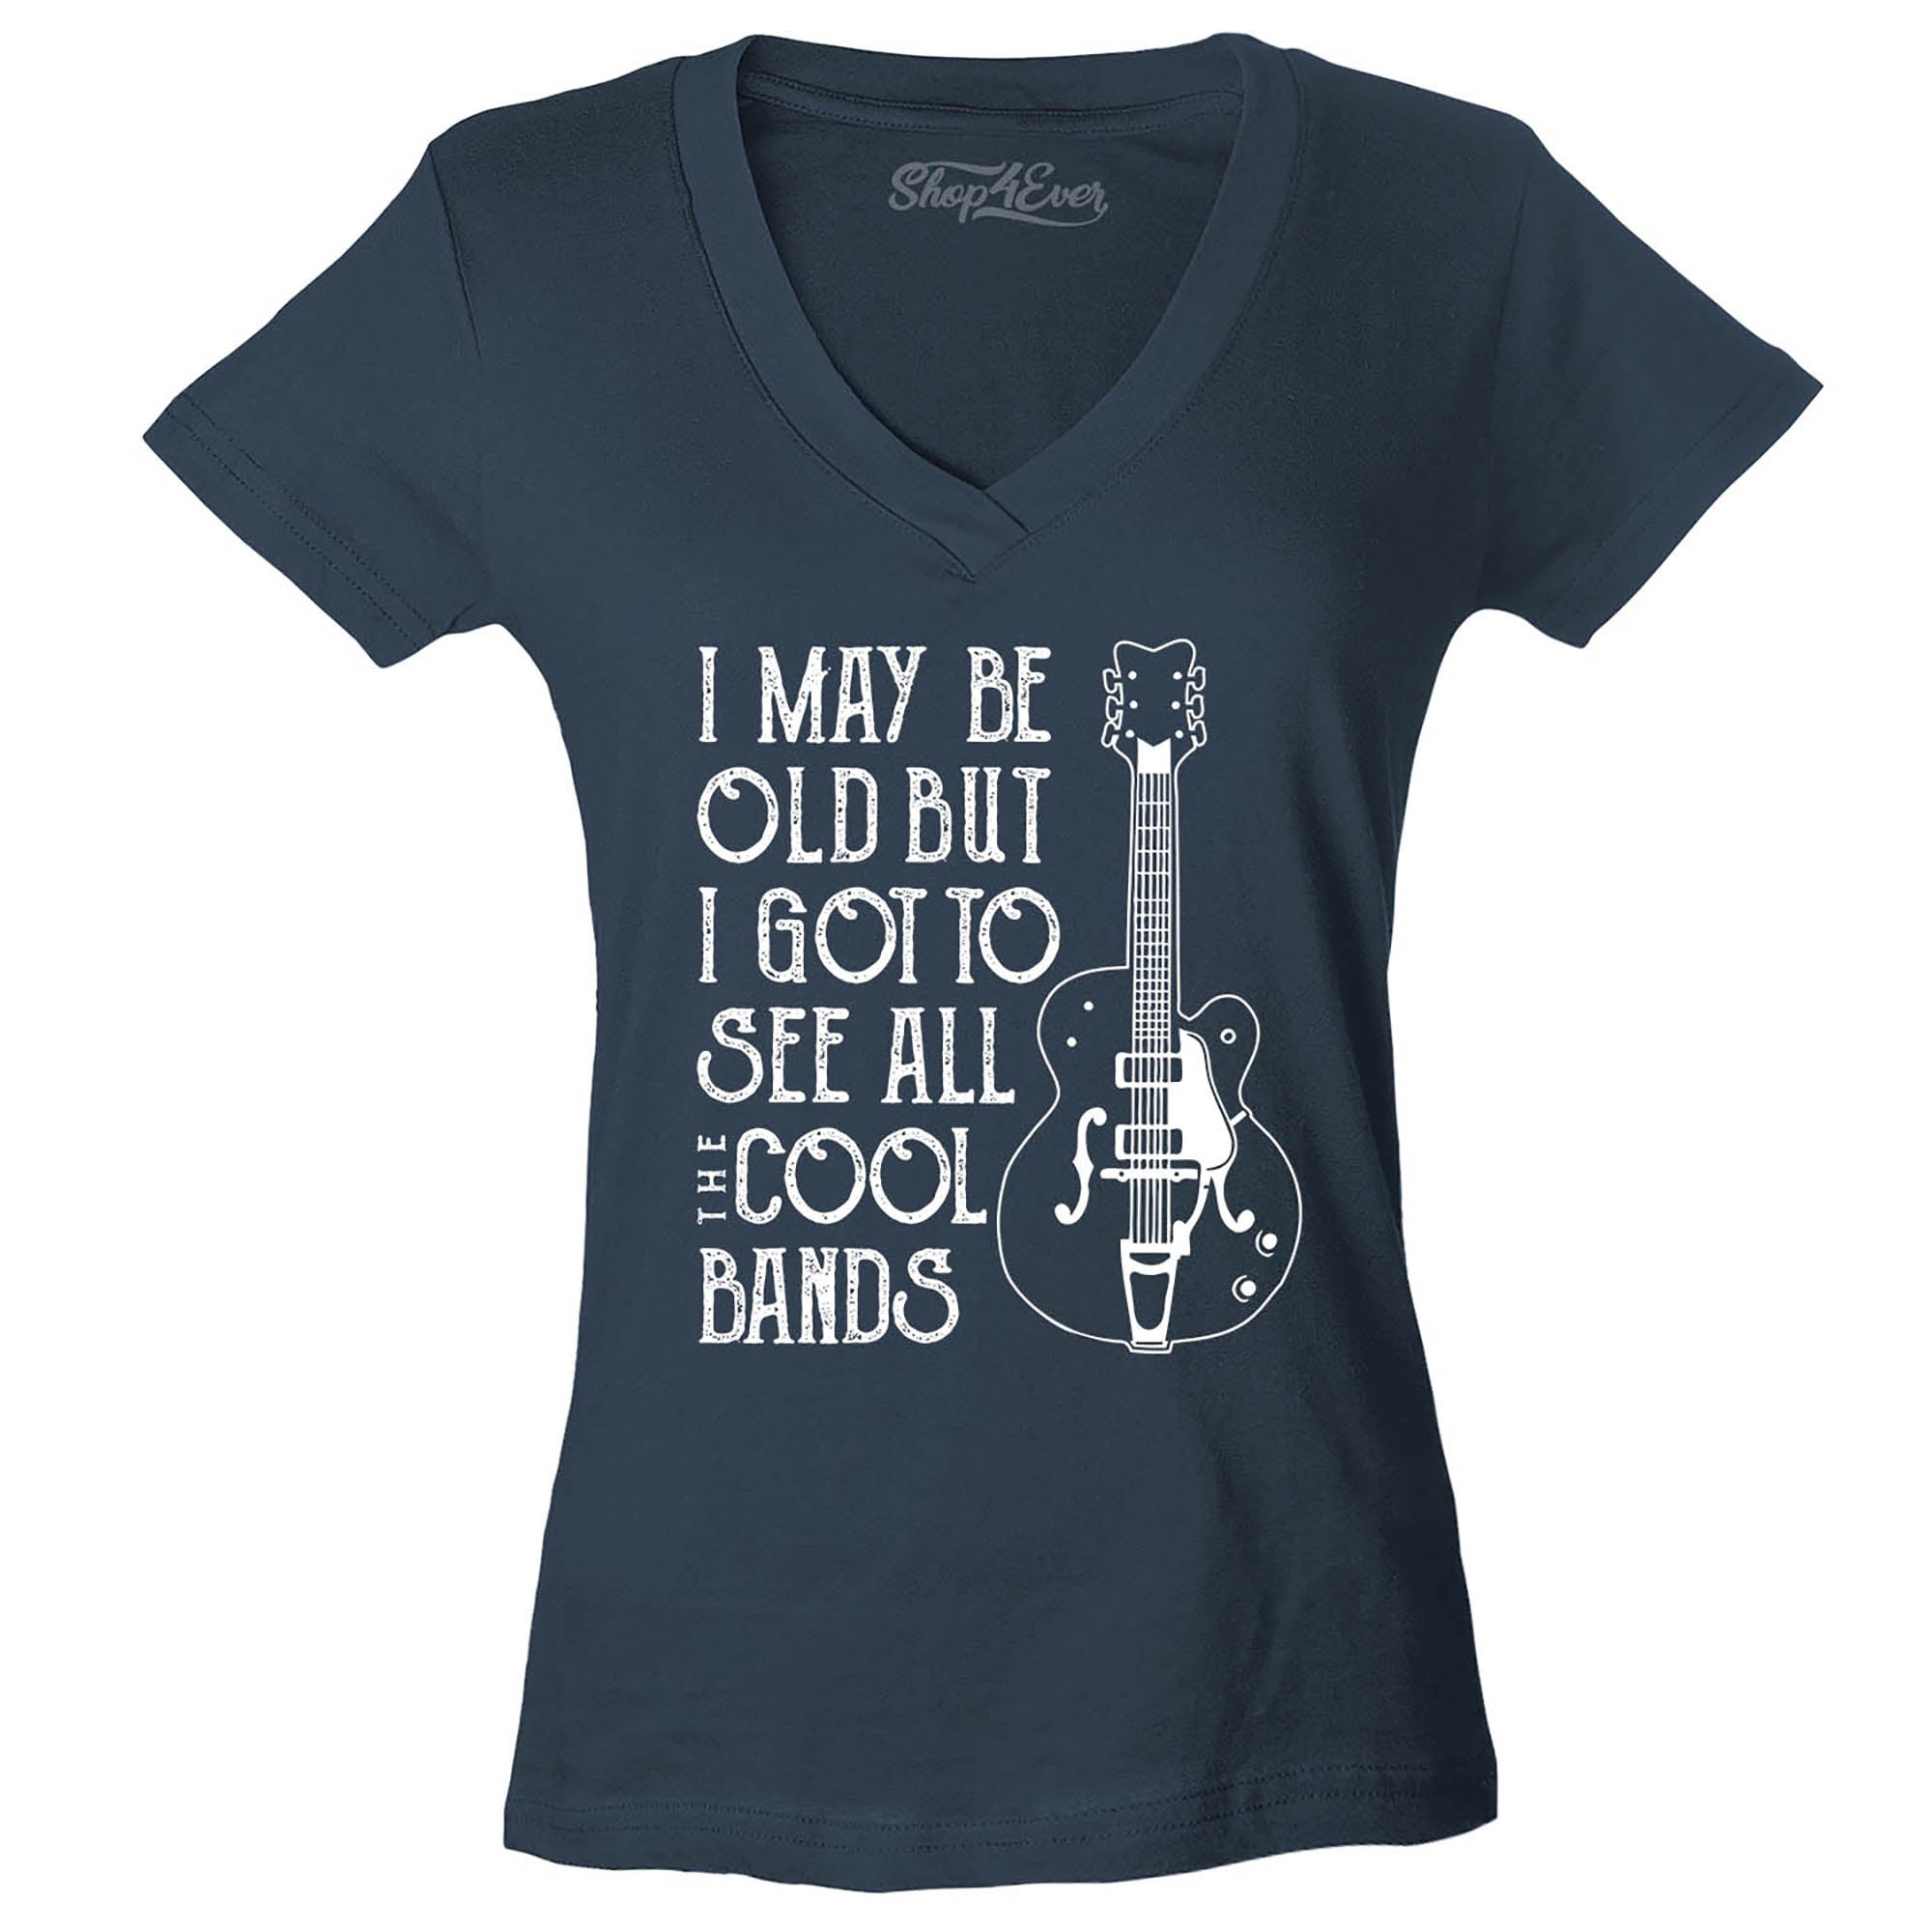 I May be Old but I Got to See All The Cool Bands Women's V-Neck T-Shirt Slim Fit